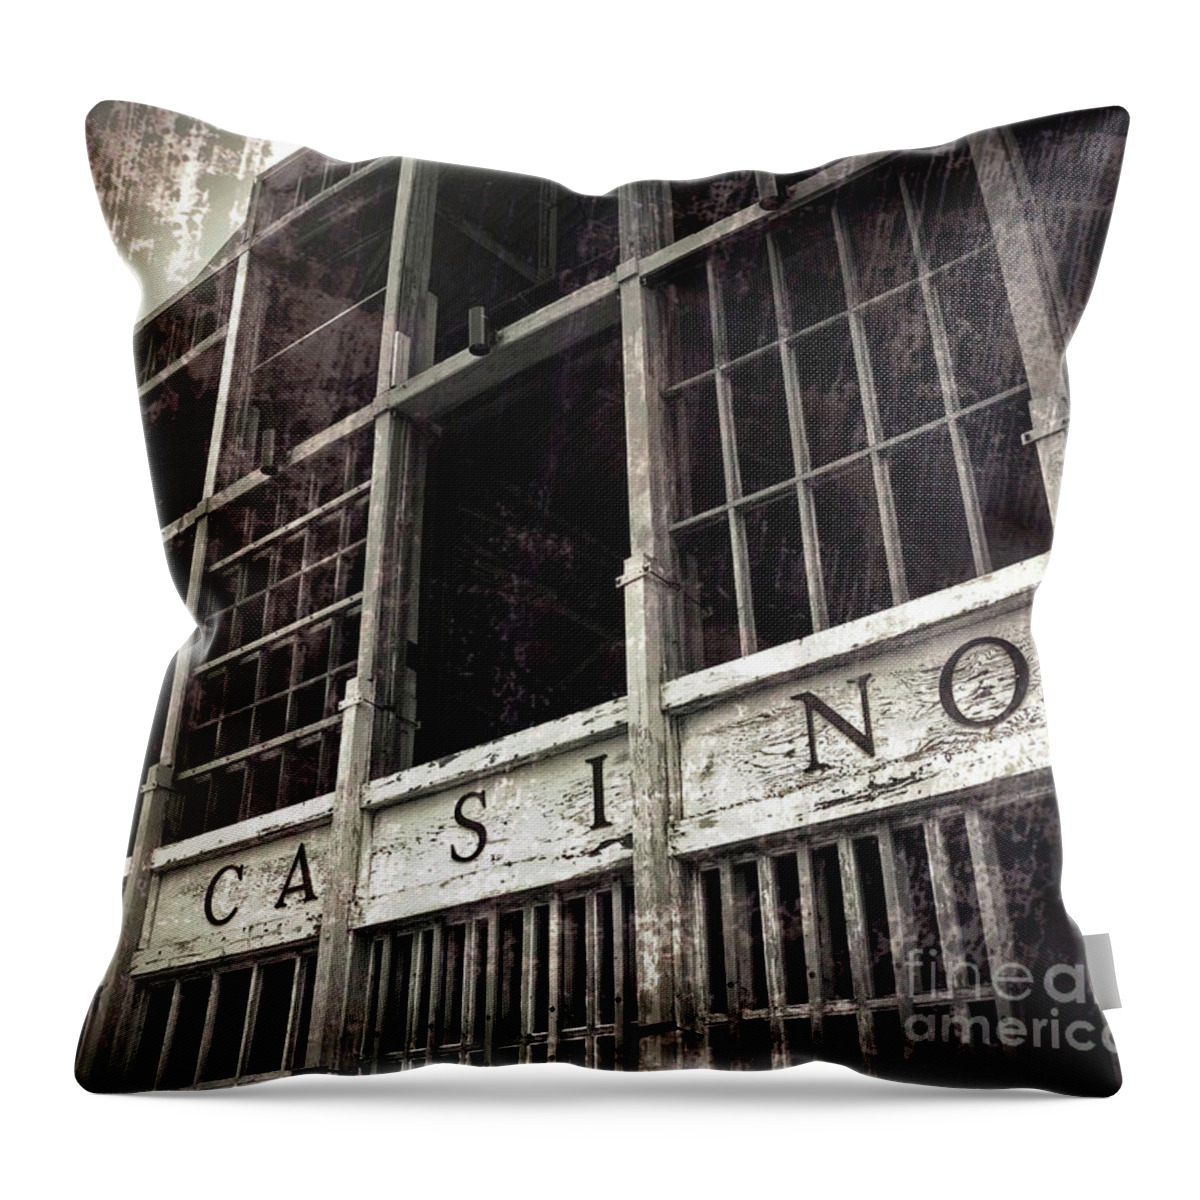 Casino Throw Pillow featuring the photograph Fall Of An Empire by Kevyn Bashore